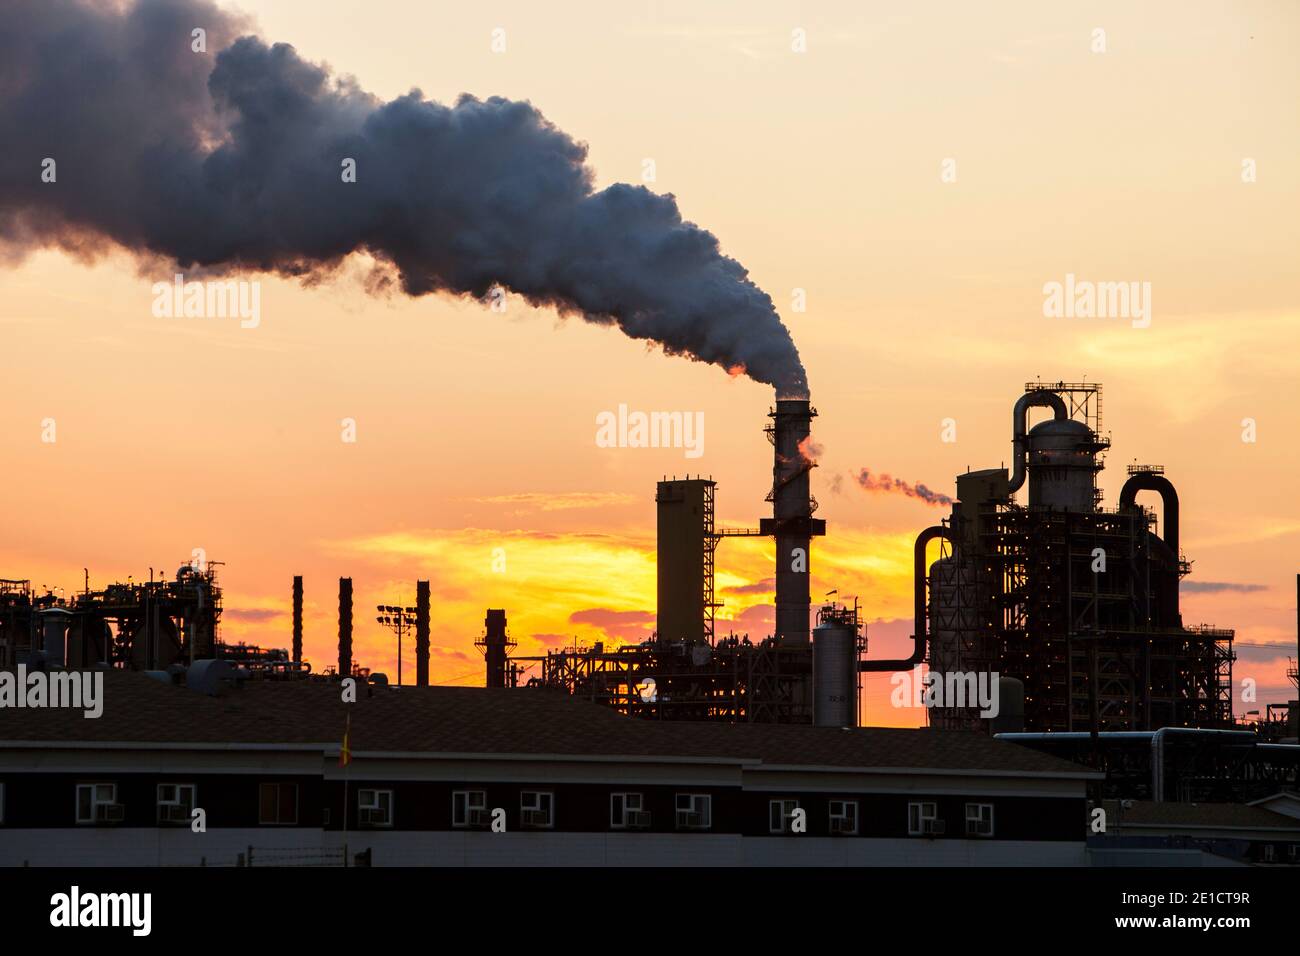 The tar sands upgrader plant at the Syncrude mine north of Fort McMurray, Alberta, Canada, at sunset.. The tar sands are the largest industrial projec Stock Photo